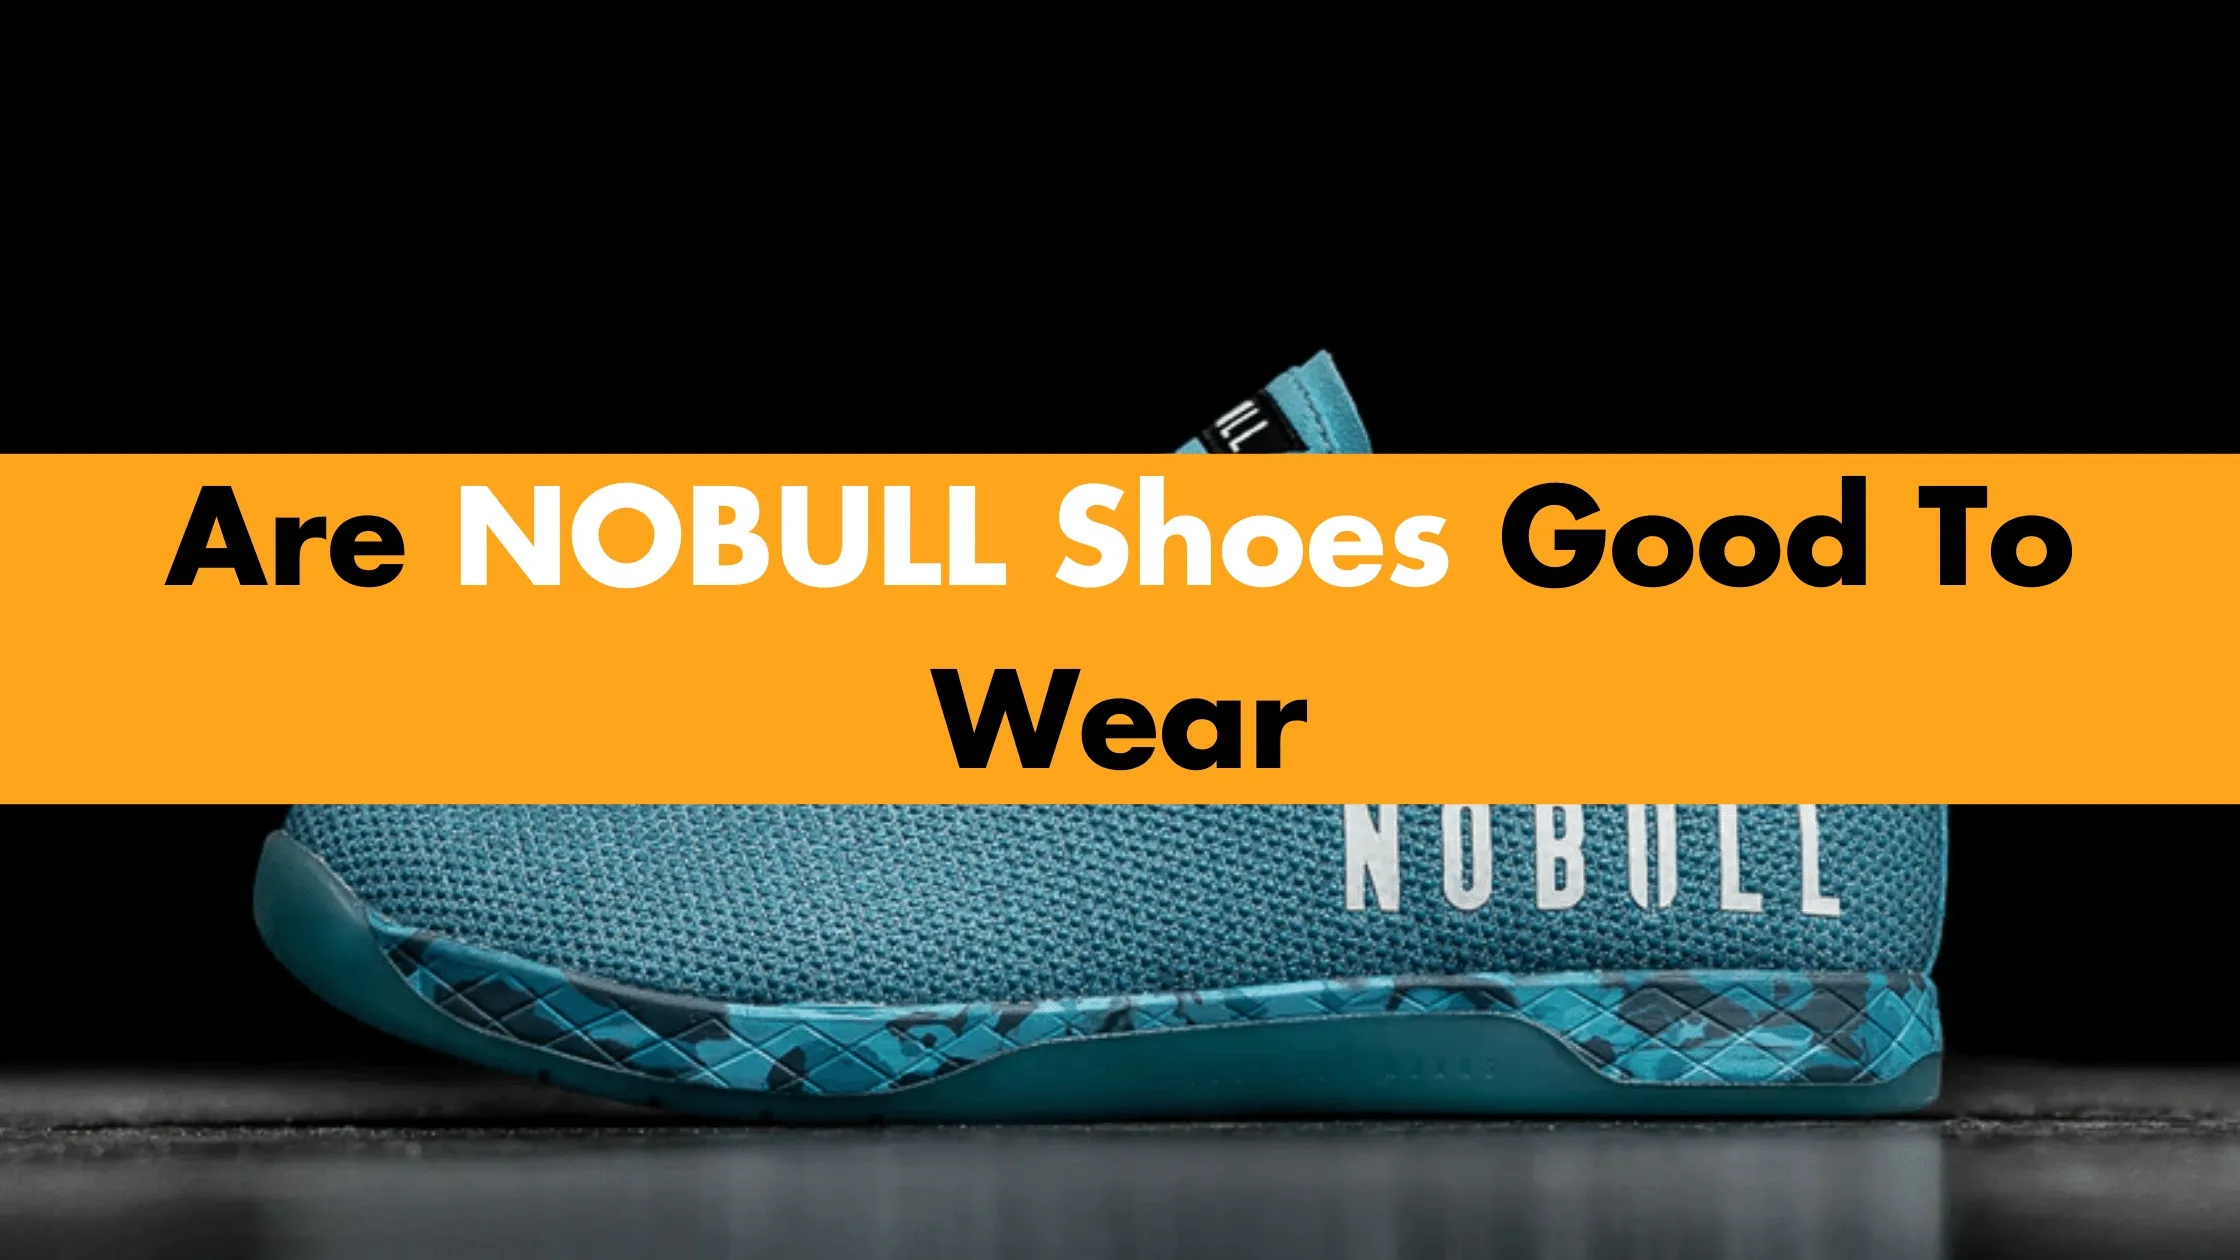 Are NOBULL Shoes Good To Wear